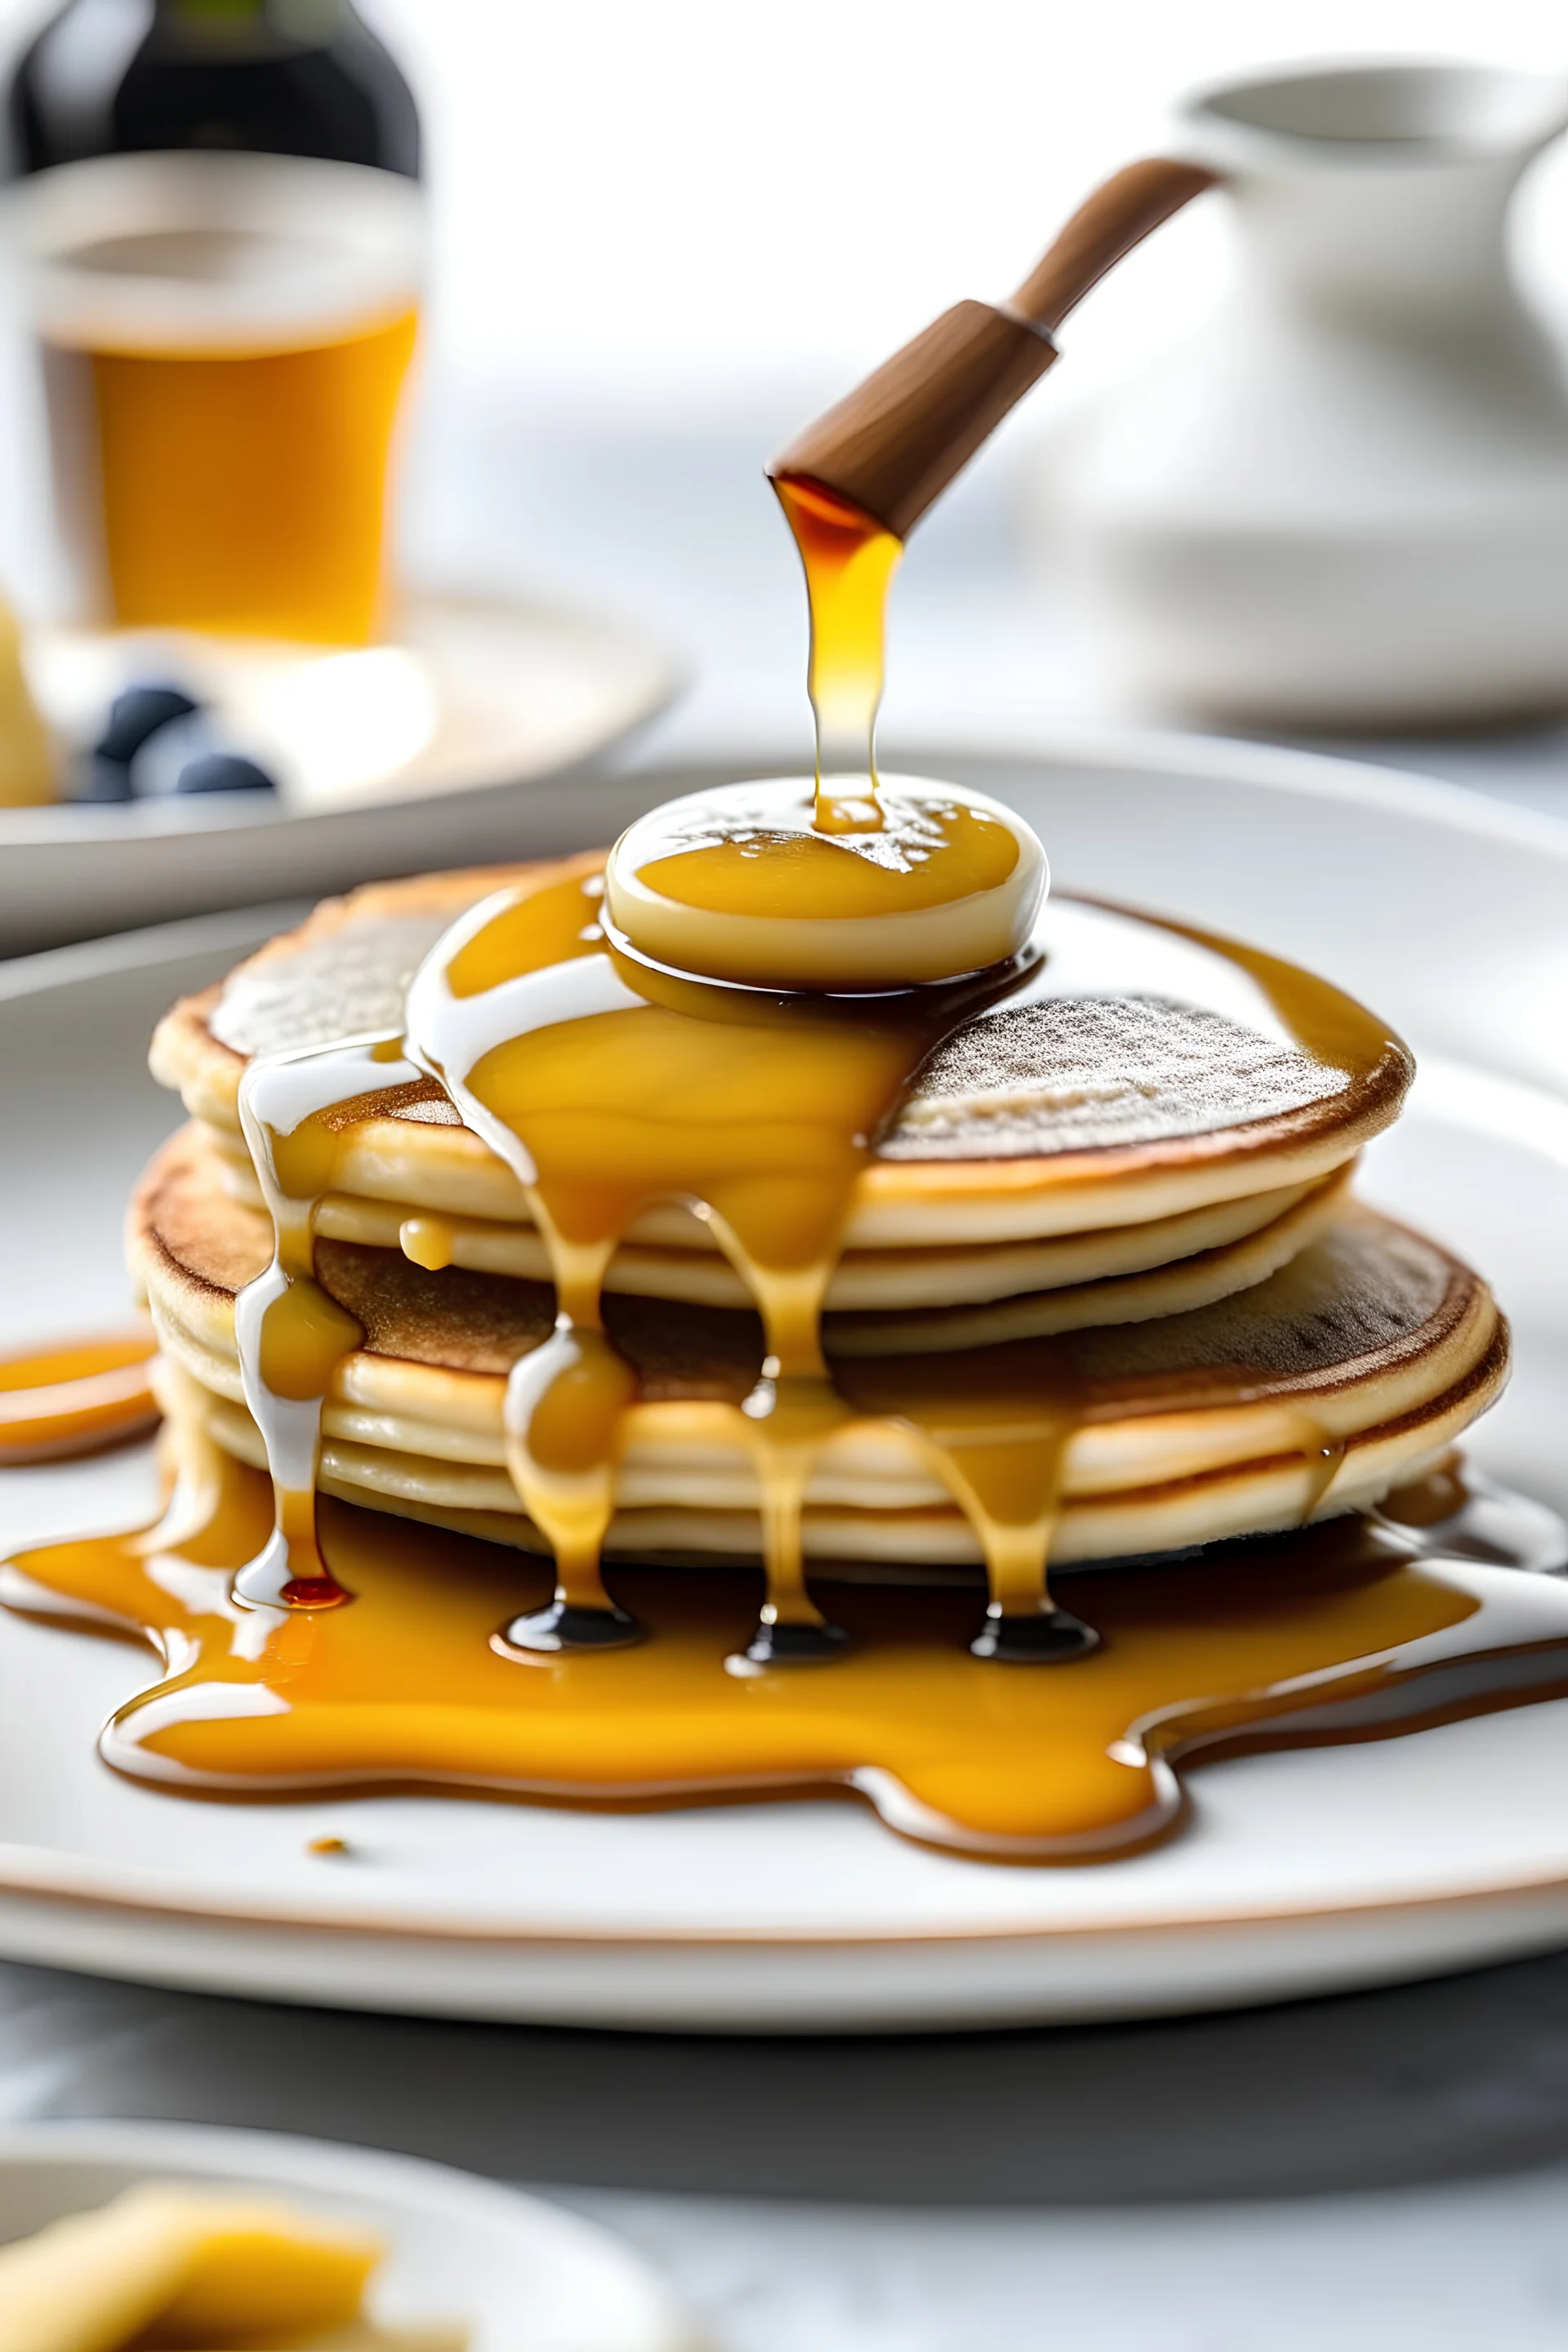 mouthwatering image of fluffly pancakes on a plate with a maple syrup pour